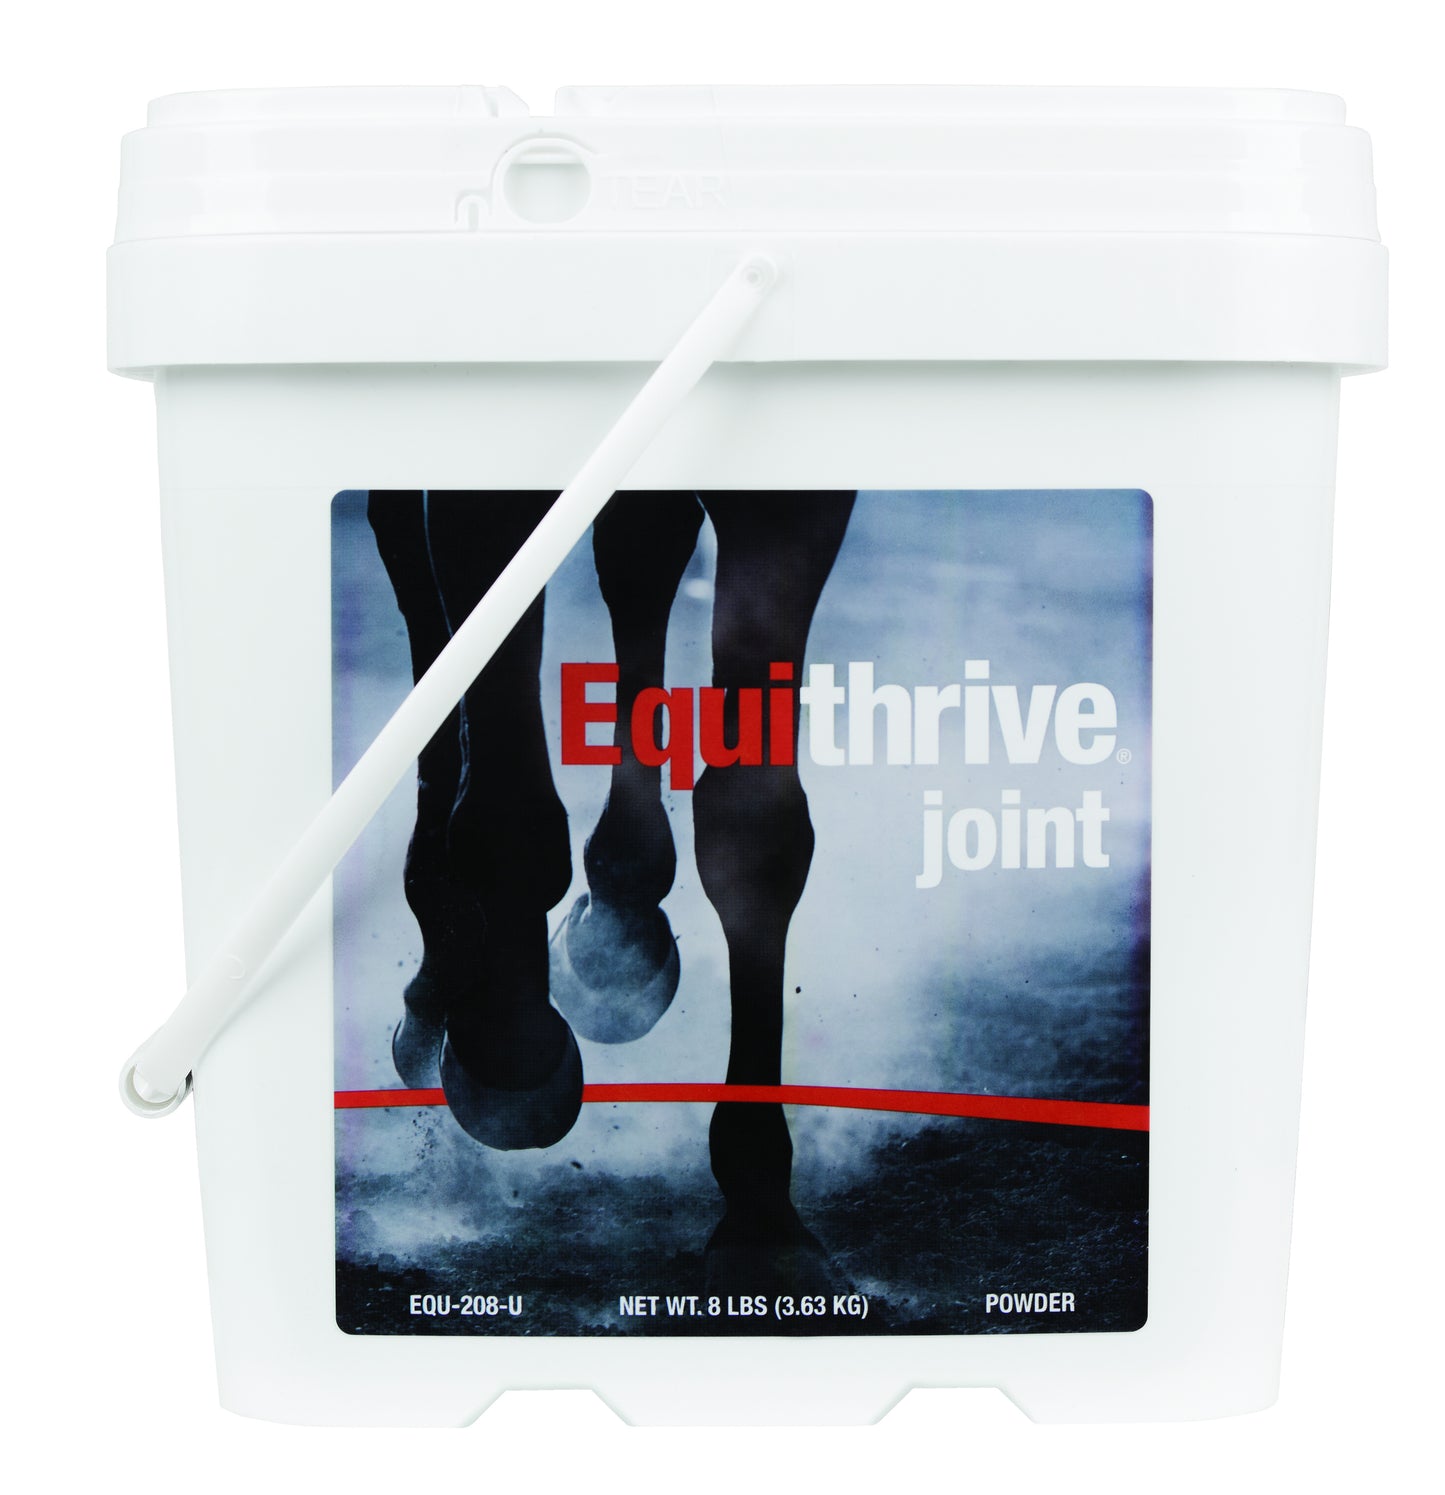 Equithrive Products Now Available in Canada